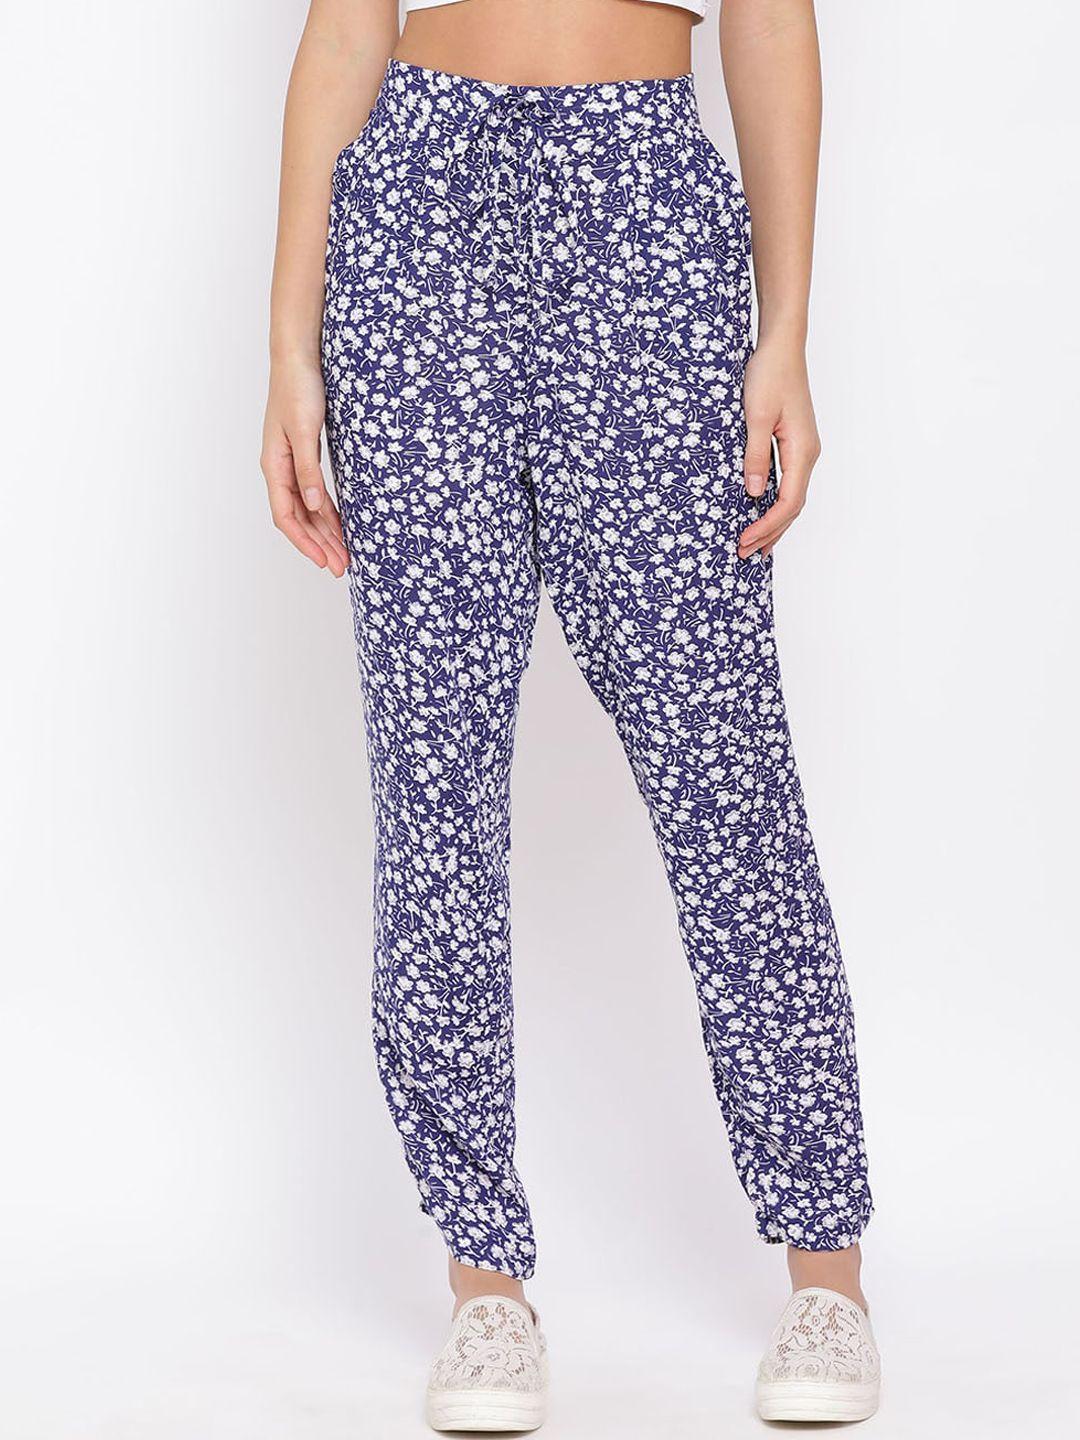 oxolloxo-women-blue-regular-fit-printed-joggers